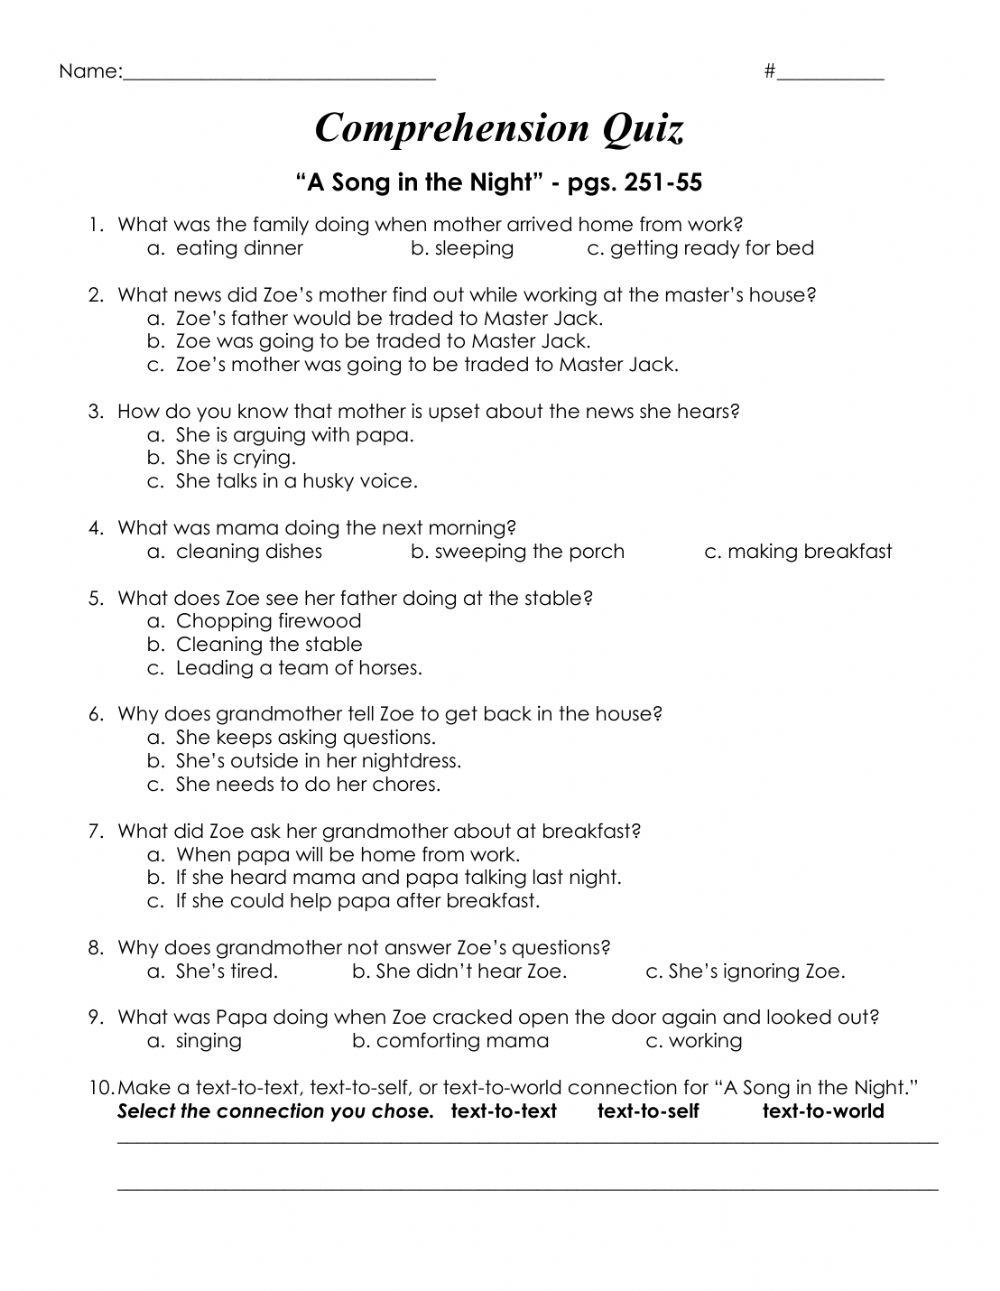 Song in the Night Comprehension Quiz